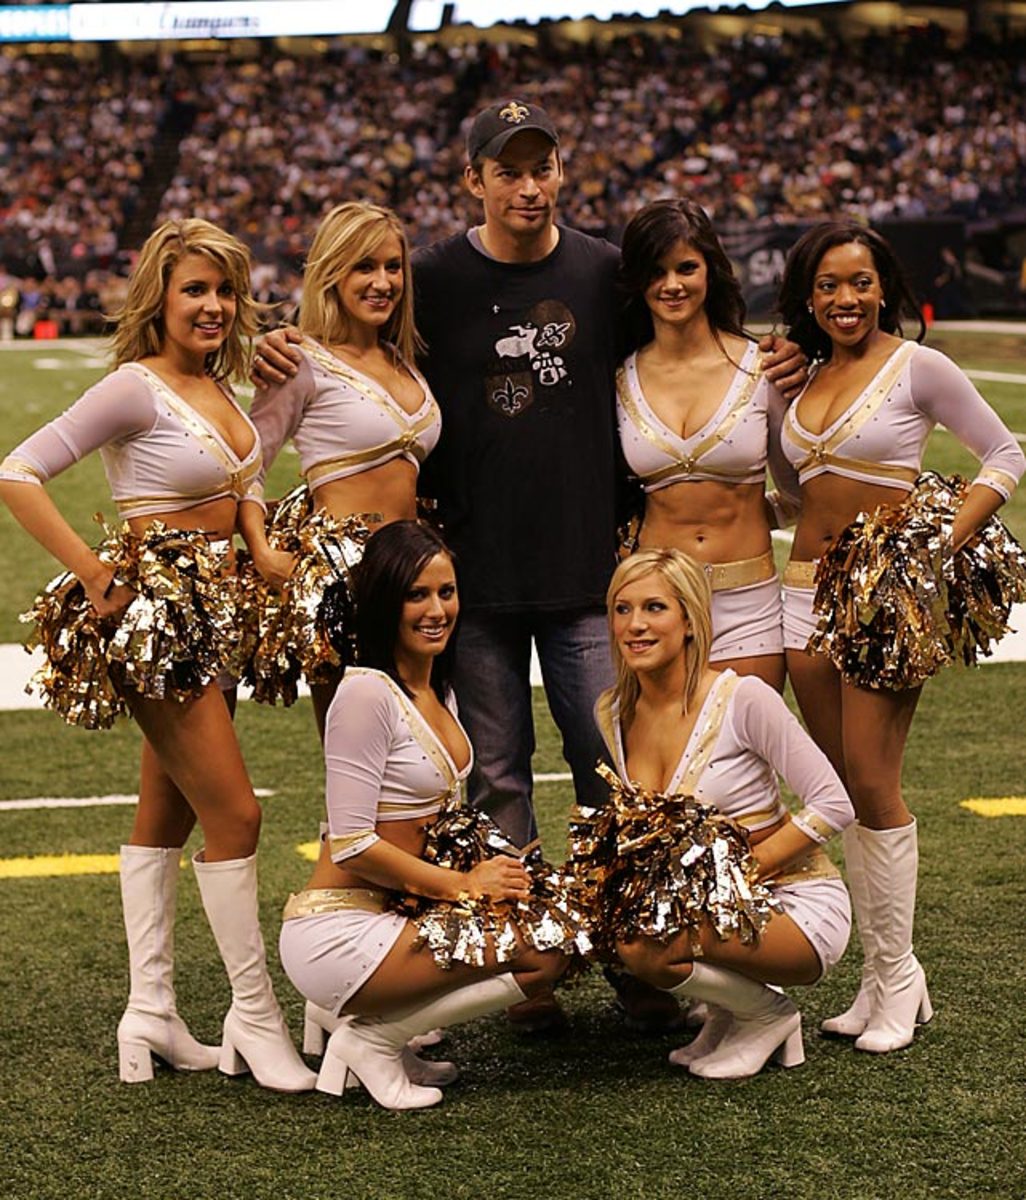 Harry Connick Jr. and New Orleans Saints Cheerleaders